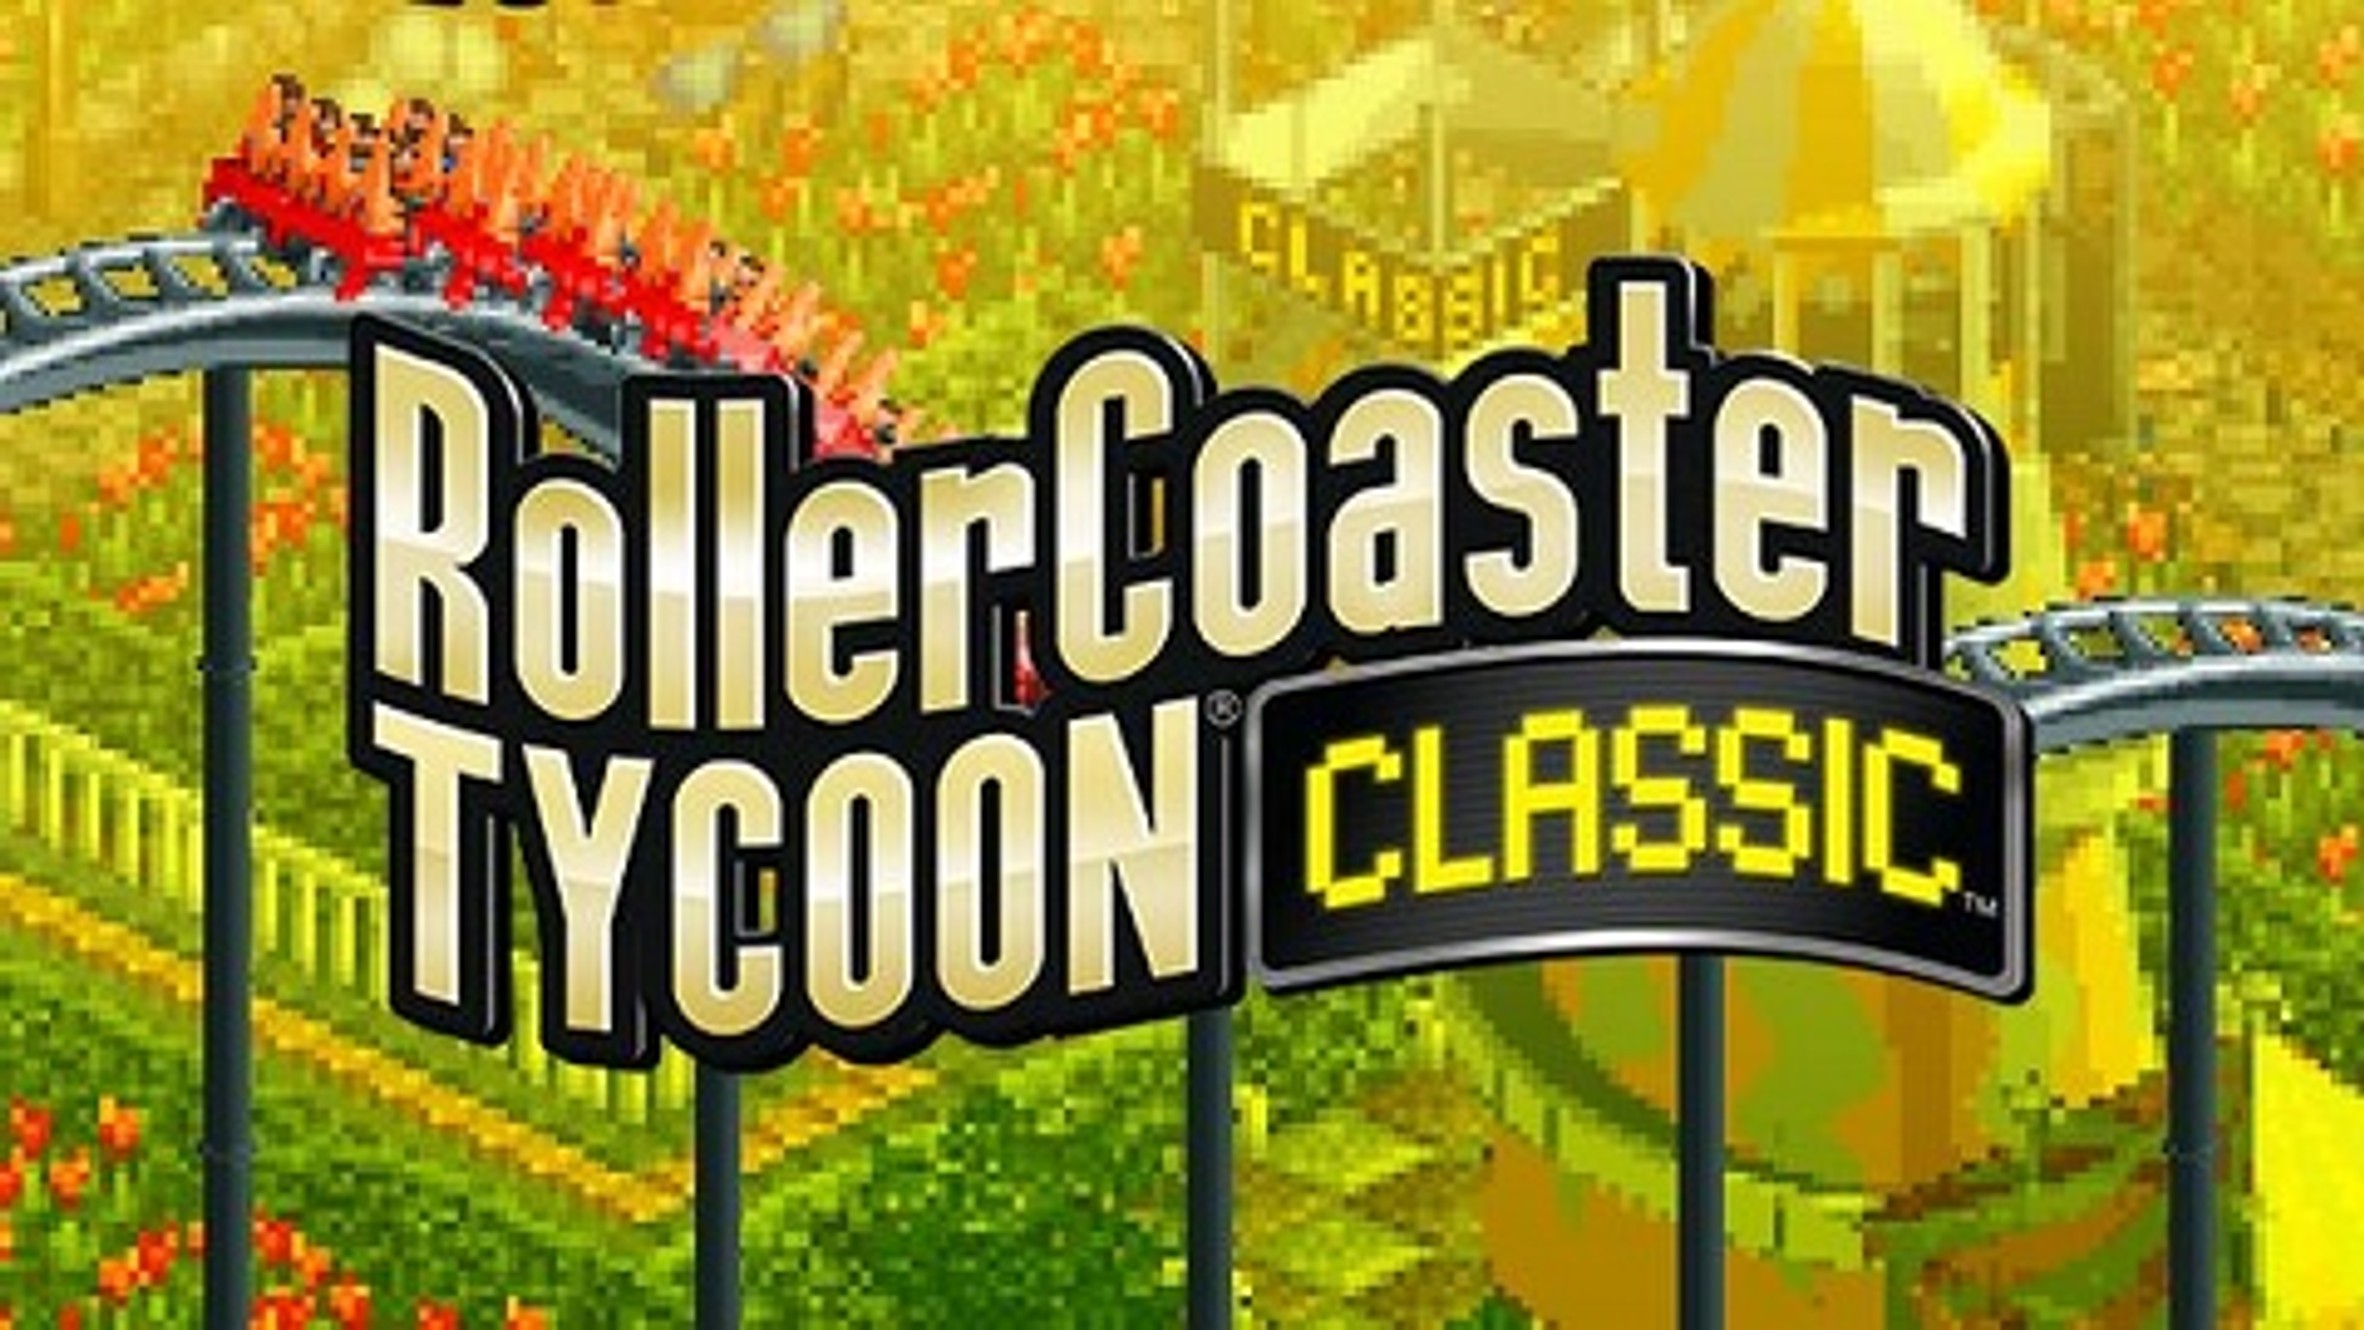 rollercoaster tycoon classic download free pc